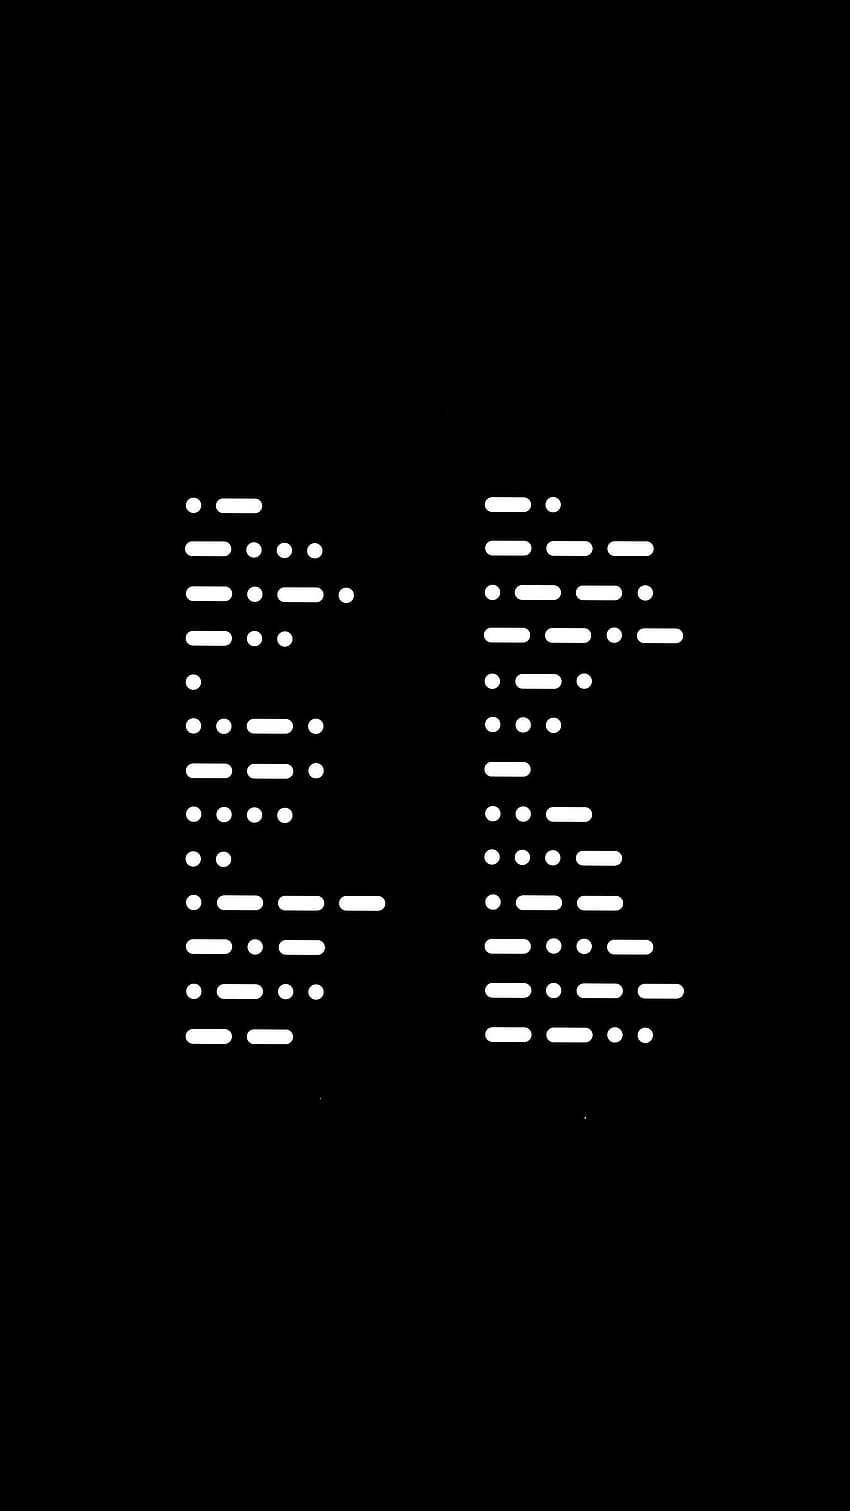 I only learnt Morse code yesterday but I made a minimalist phone HD phone wallpaper